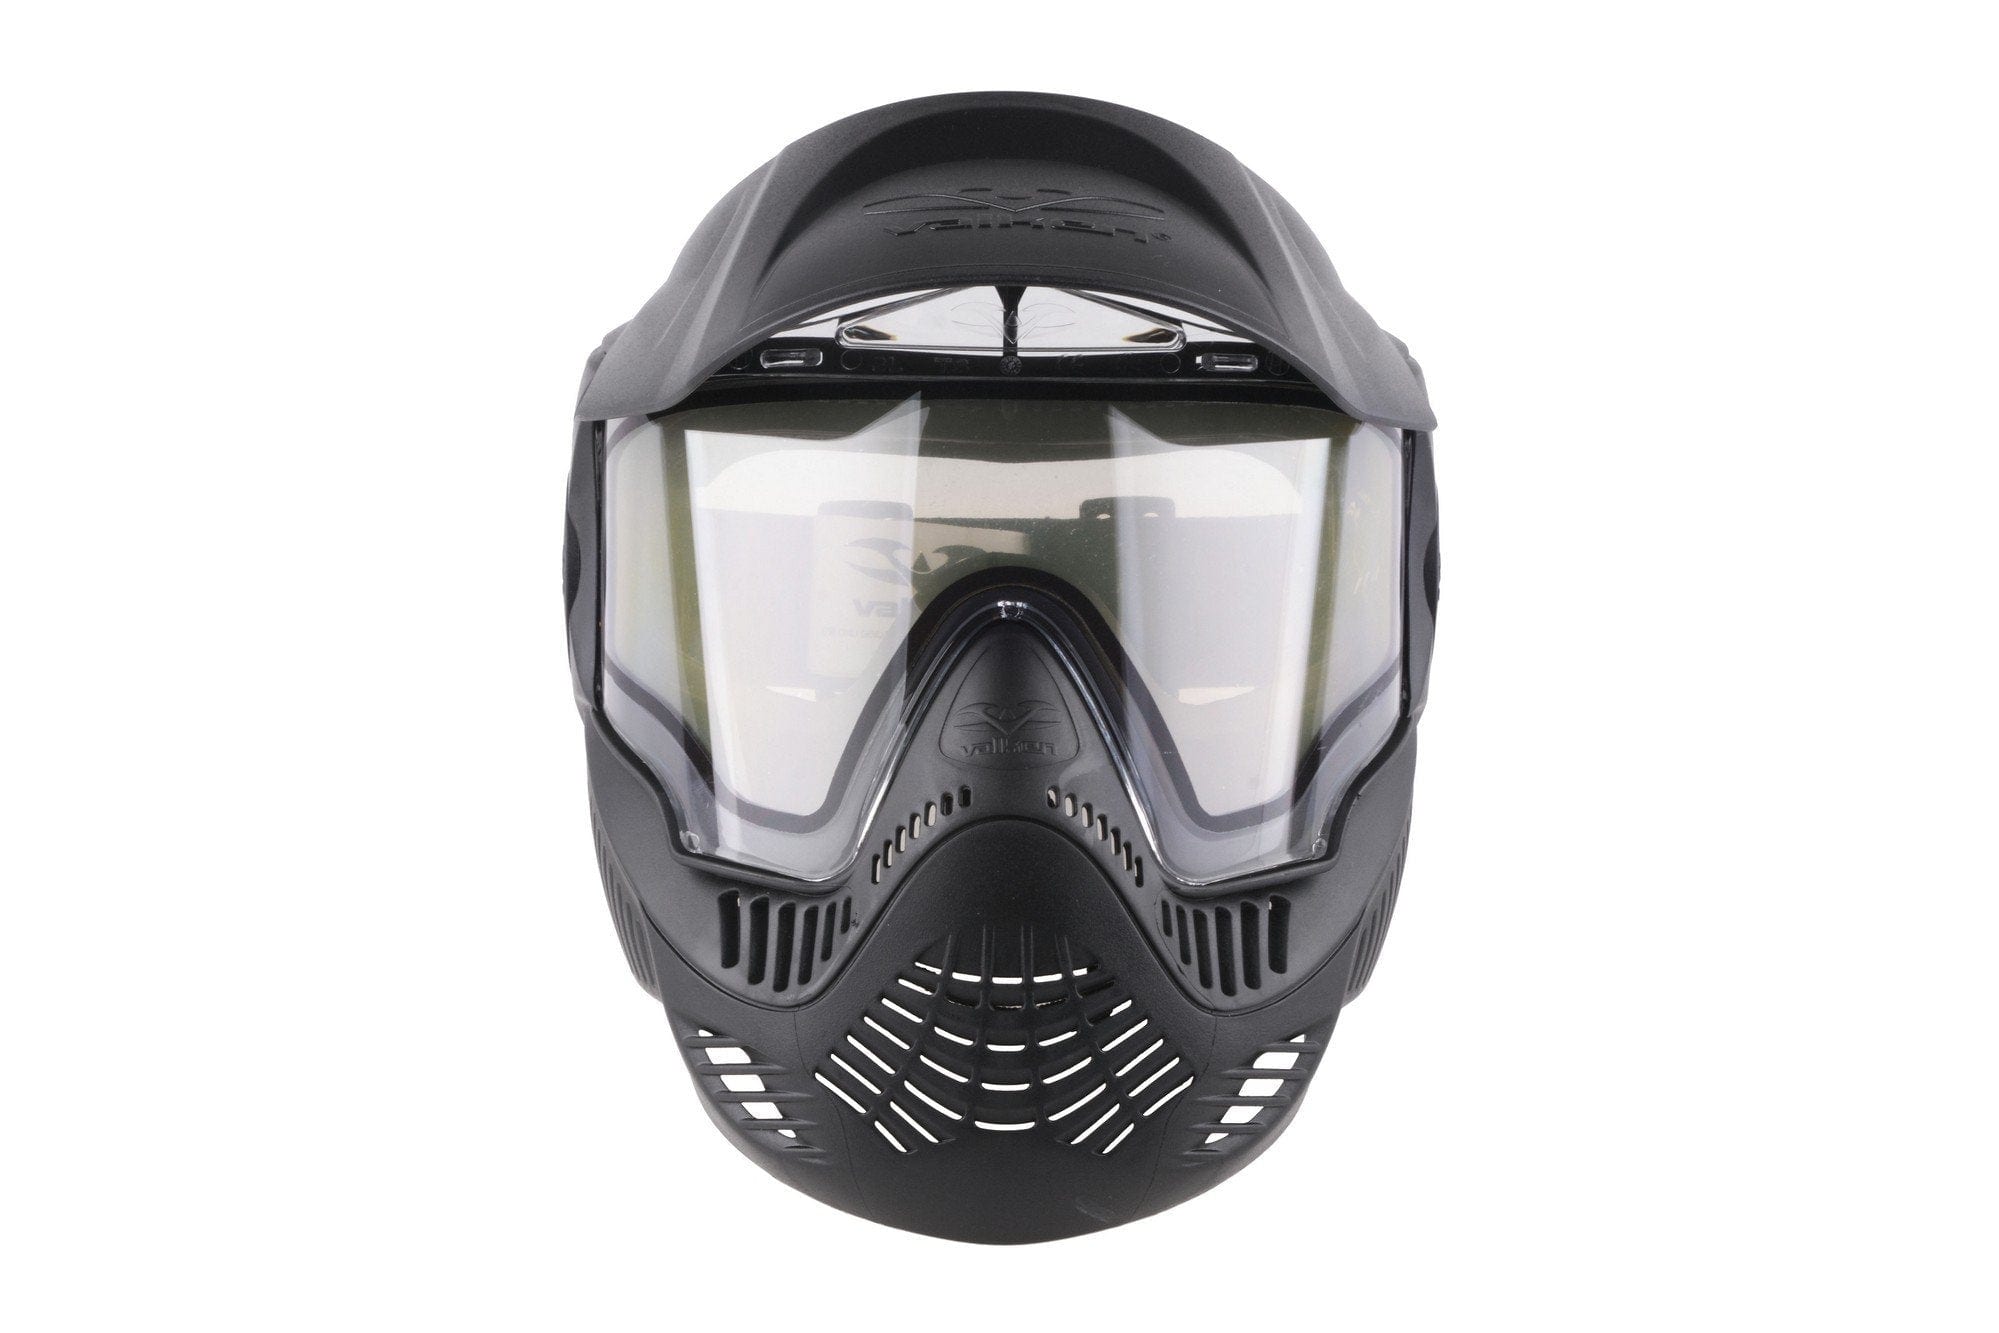 Annex MI-3 Field Thermal Protective Mask by Valken on Airsoft Mania Europe